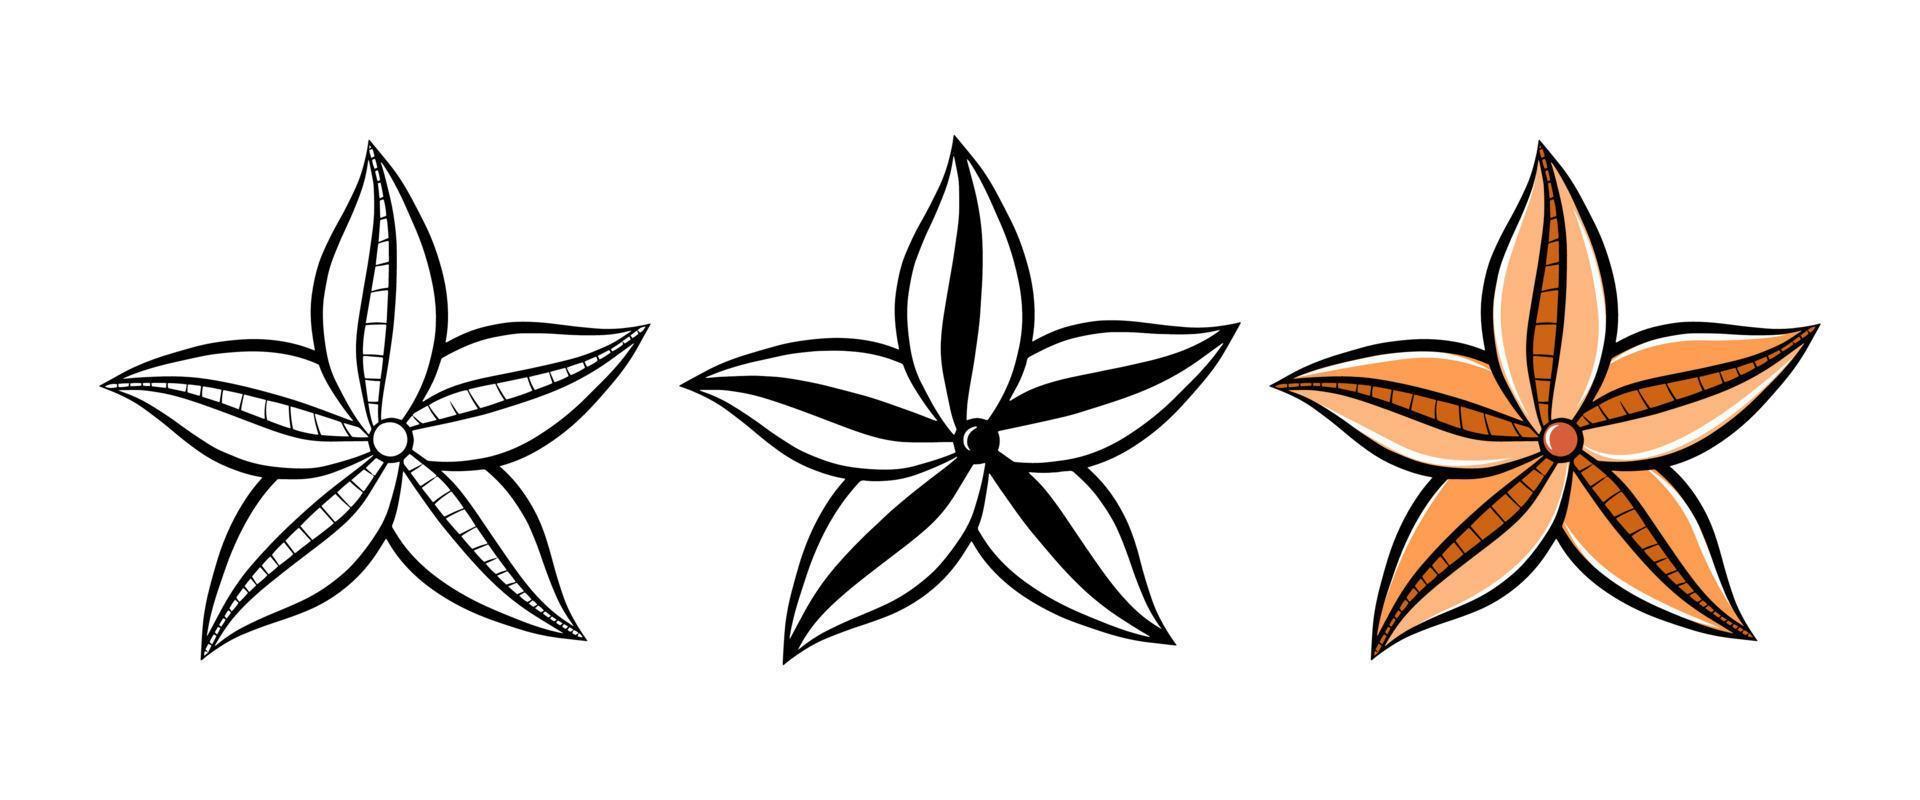 Starfish vector icon set. Isolated graphic logo design element. Ocean star fish silhouette. Aquatic sea wildlife animal. Doodle monochrome drawing template. Outline sketch sticker.